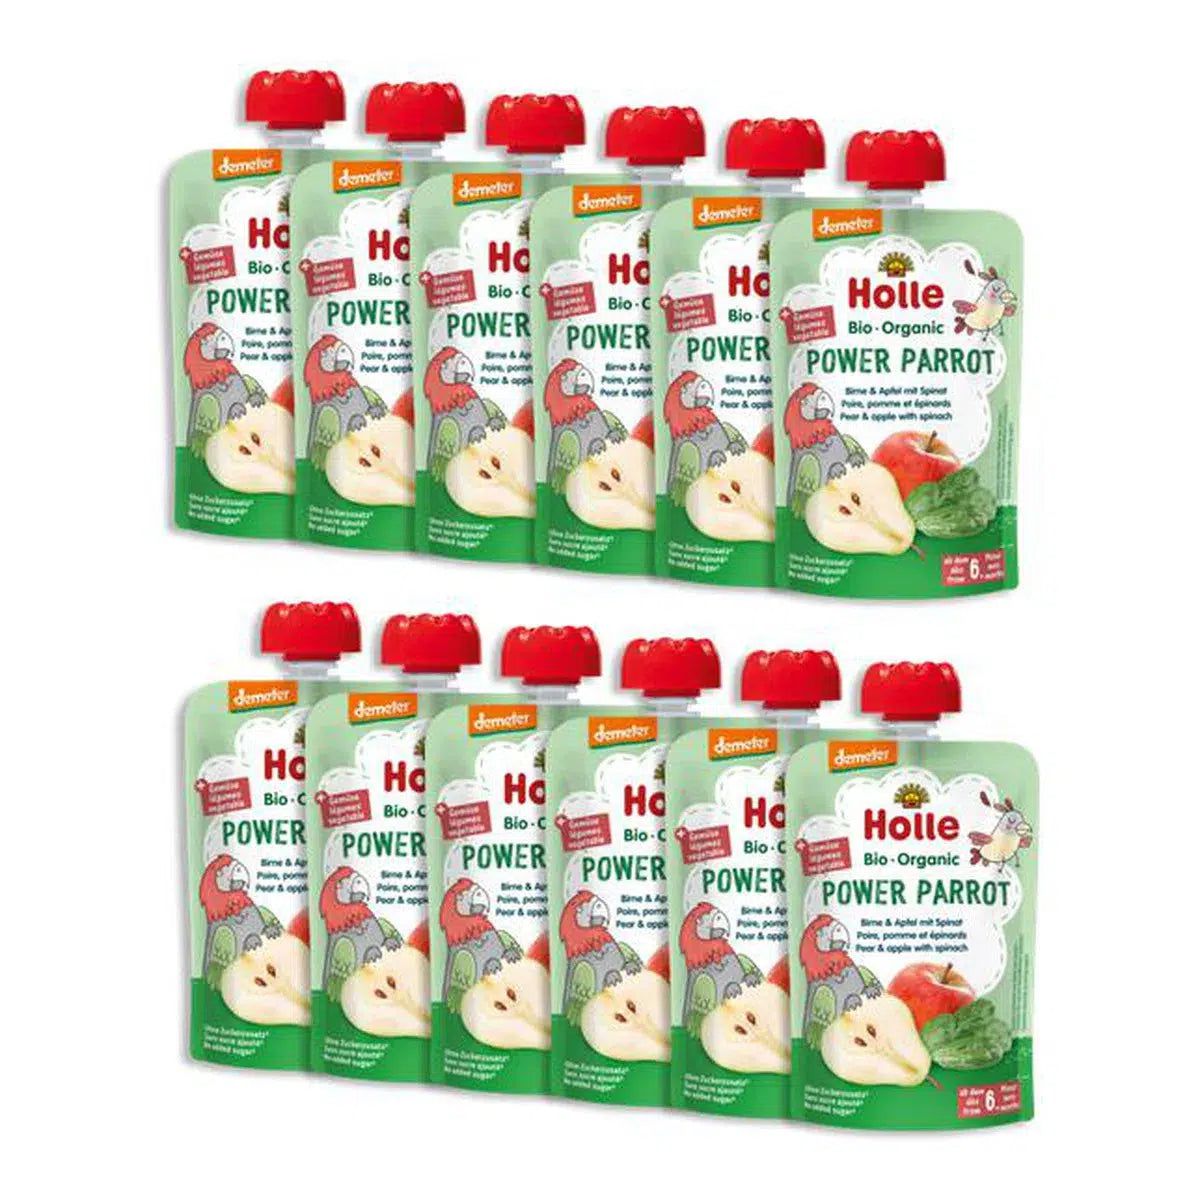 Holle Power Parrot: Pear, Apple & Spinach (6+ Months) - 12 Pouches